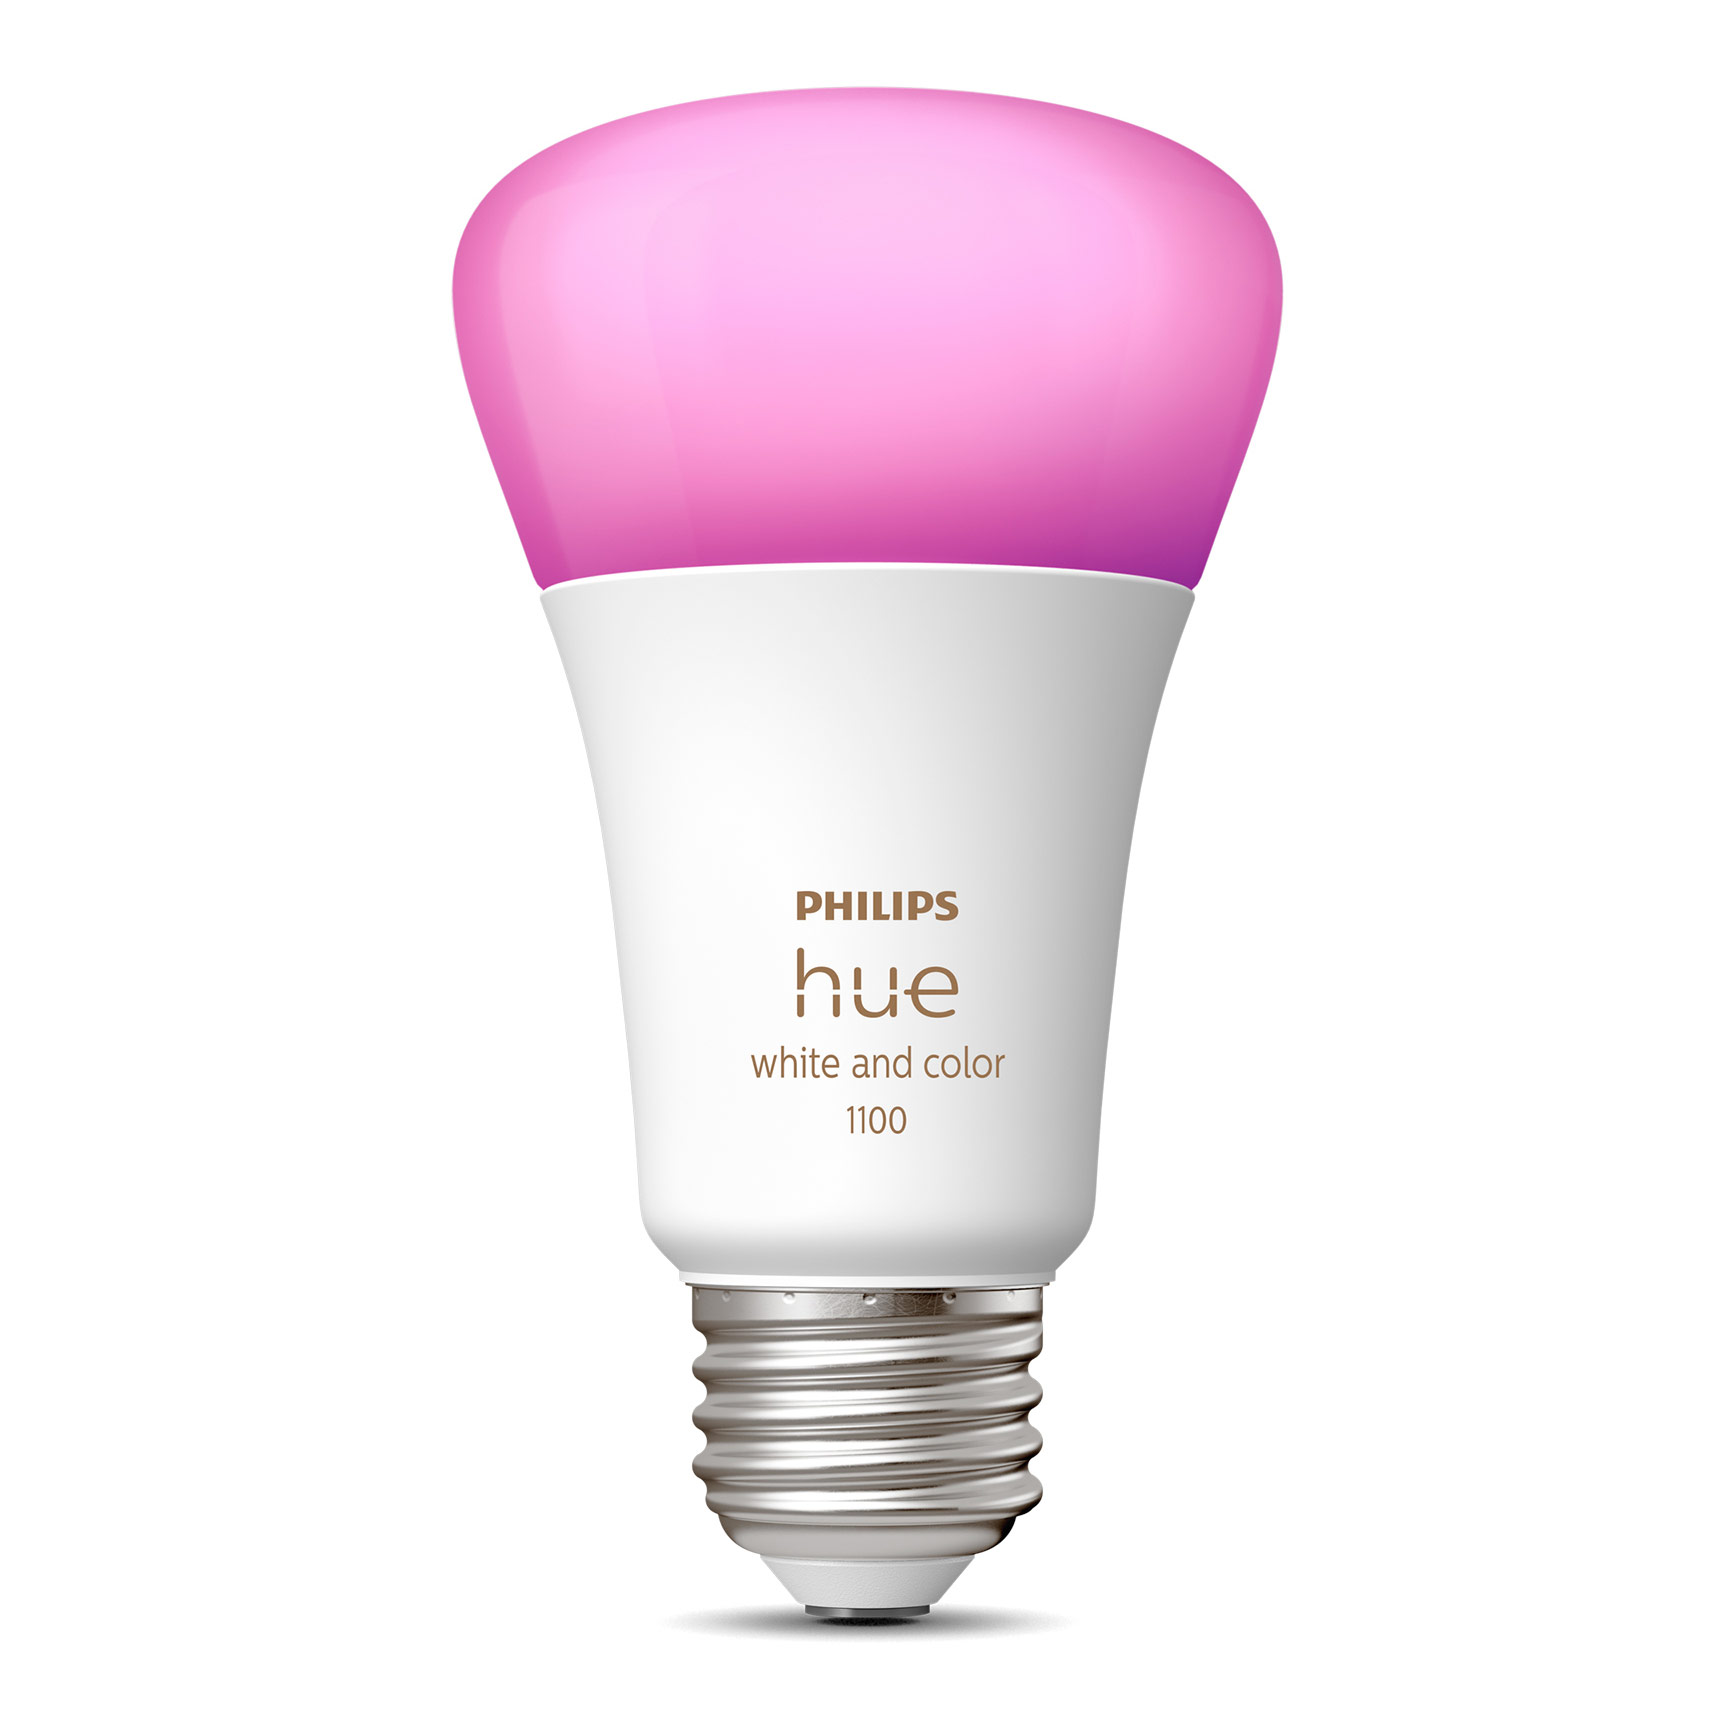 Verplaatsing toewijzen Certificaat Hue A19 White / Color Ambiance Smart Bulb by Philips Hue | HUE-563254 |  HUE1093480